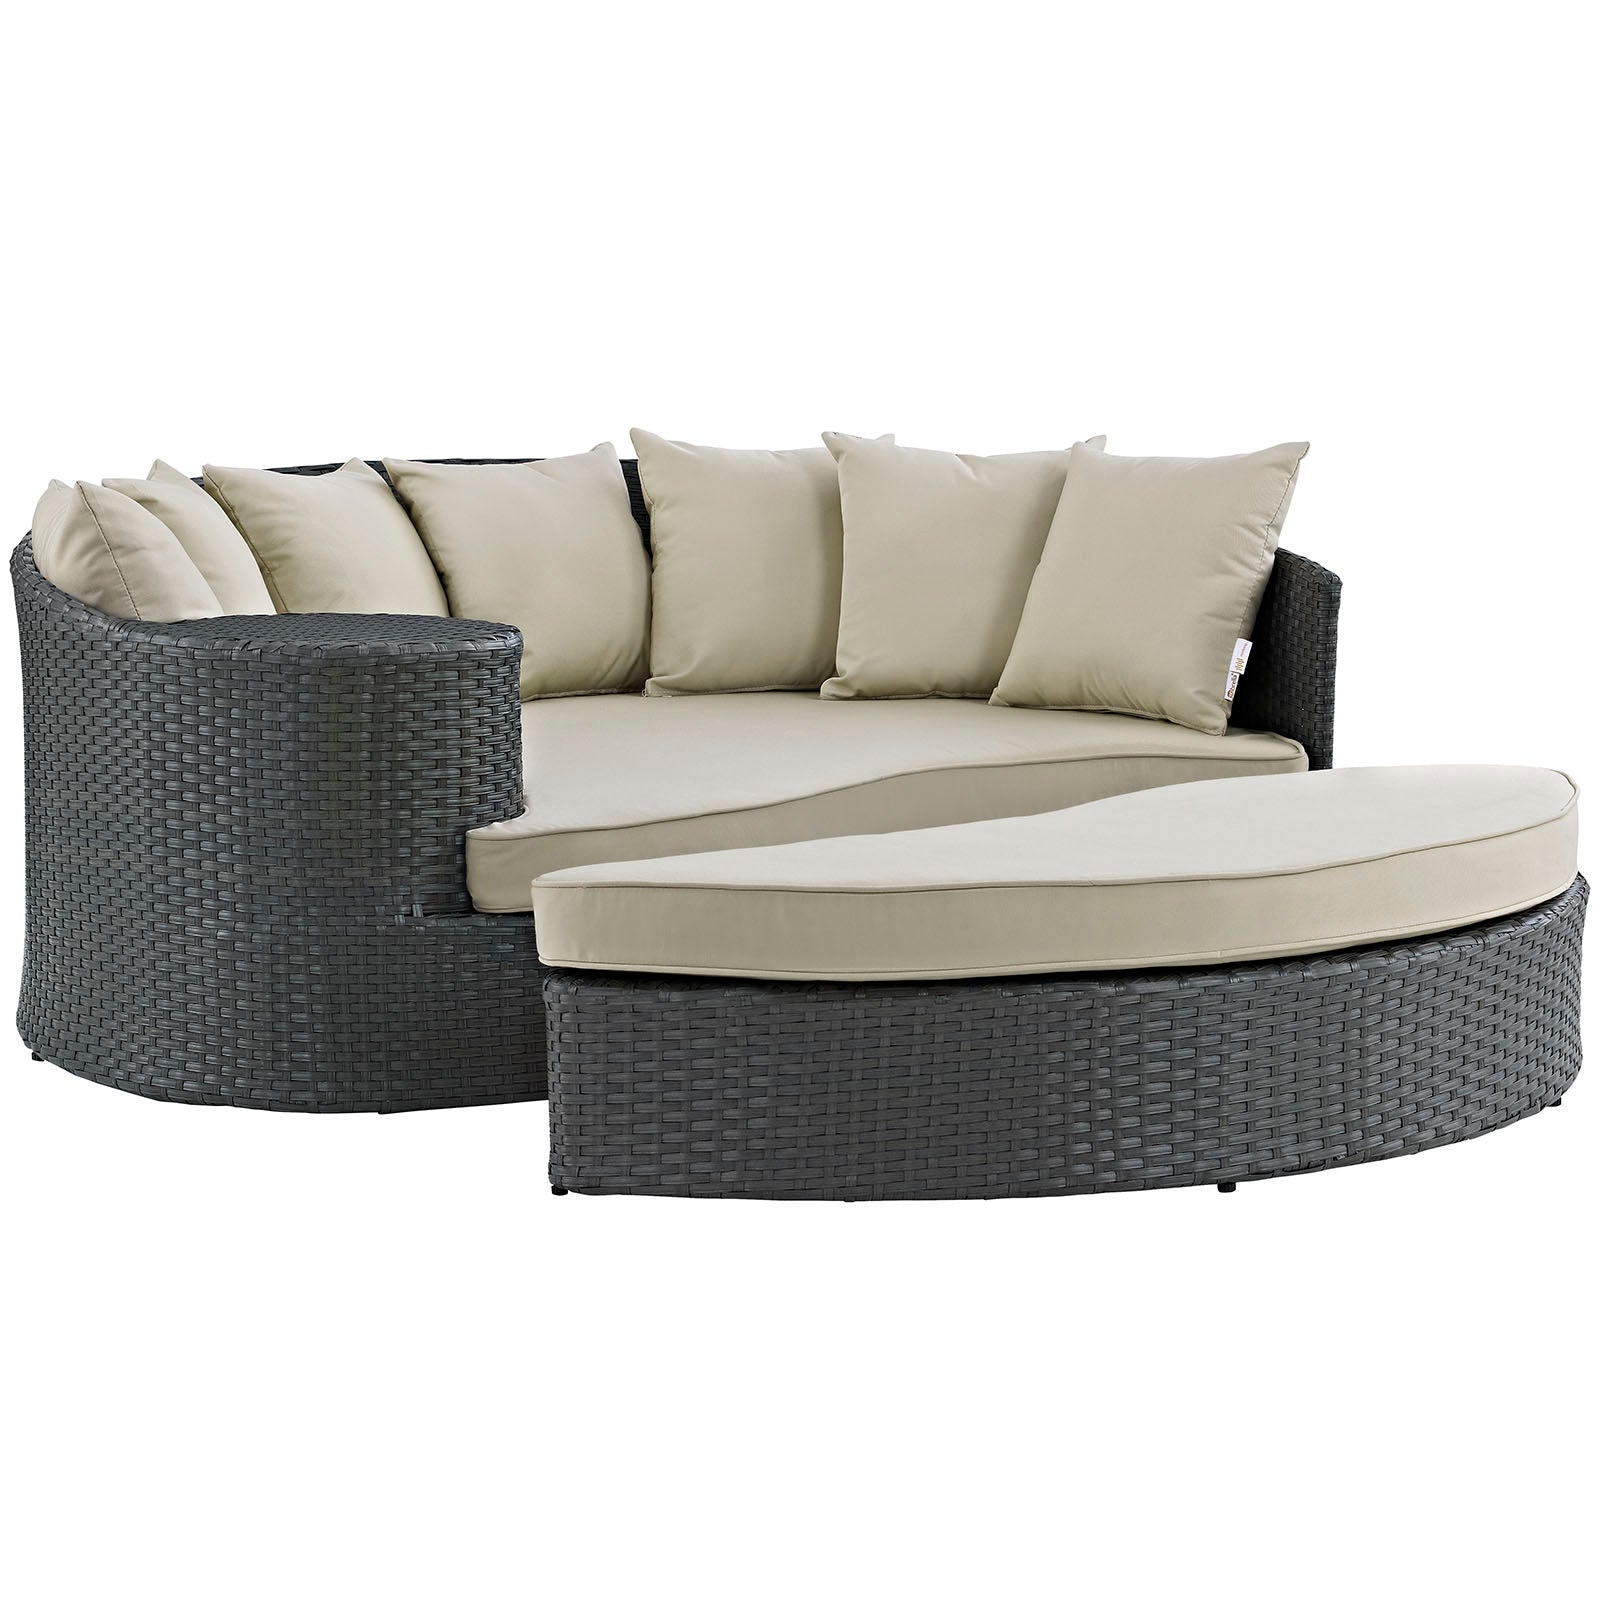 Sojourn Outdoor Patio Sunbrella Daybed with Ottoman